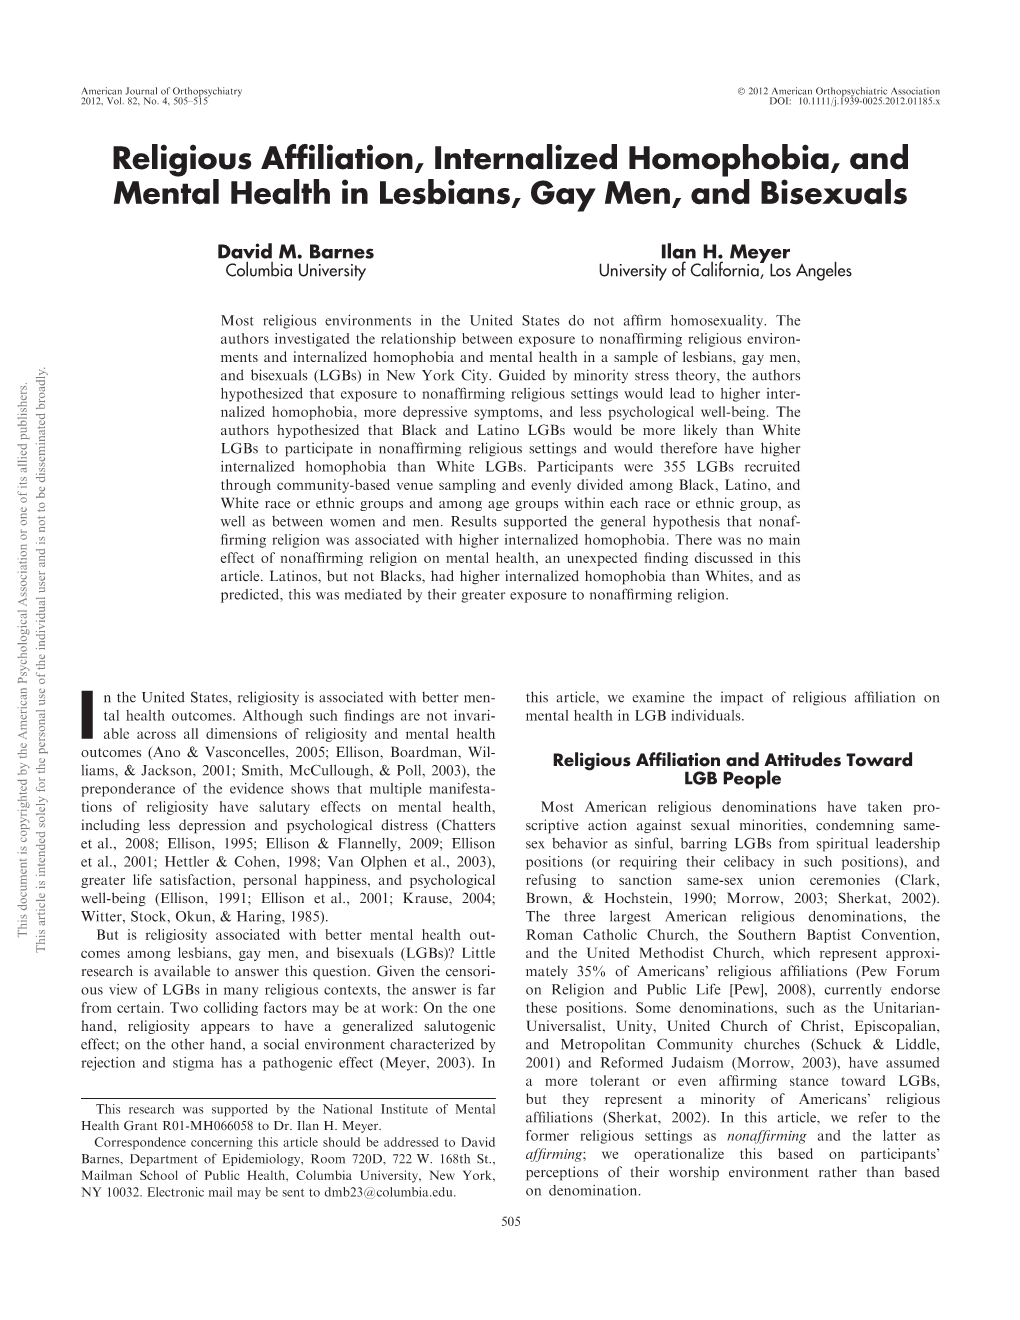 Religious Affiliation, Internalized Homophobia, and Mental Health In